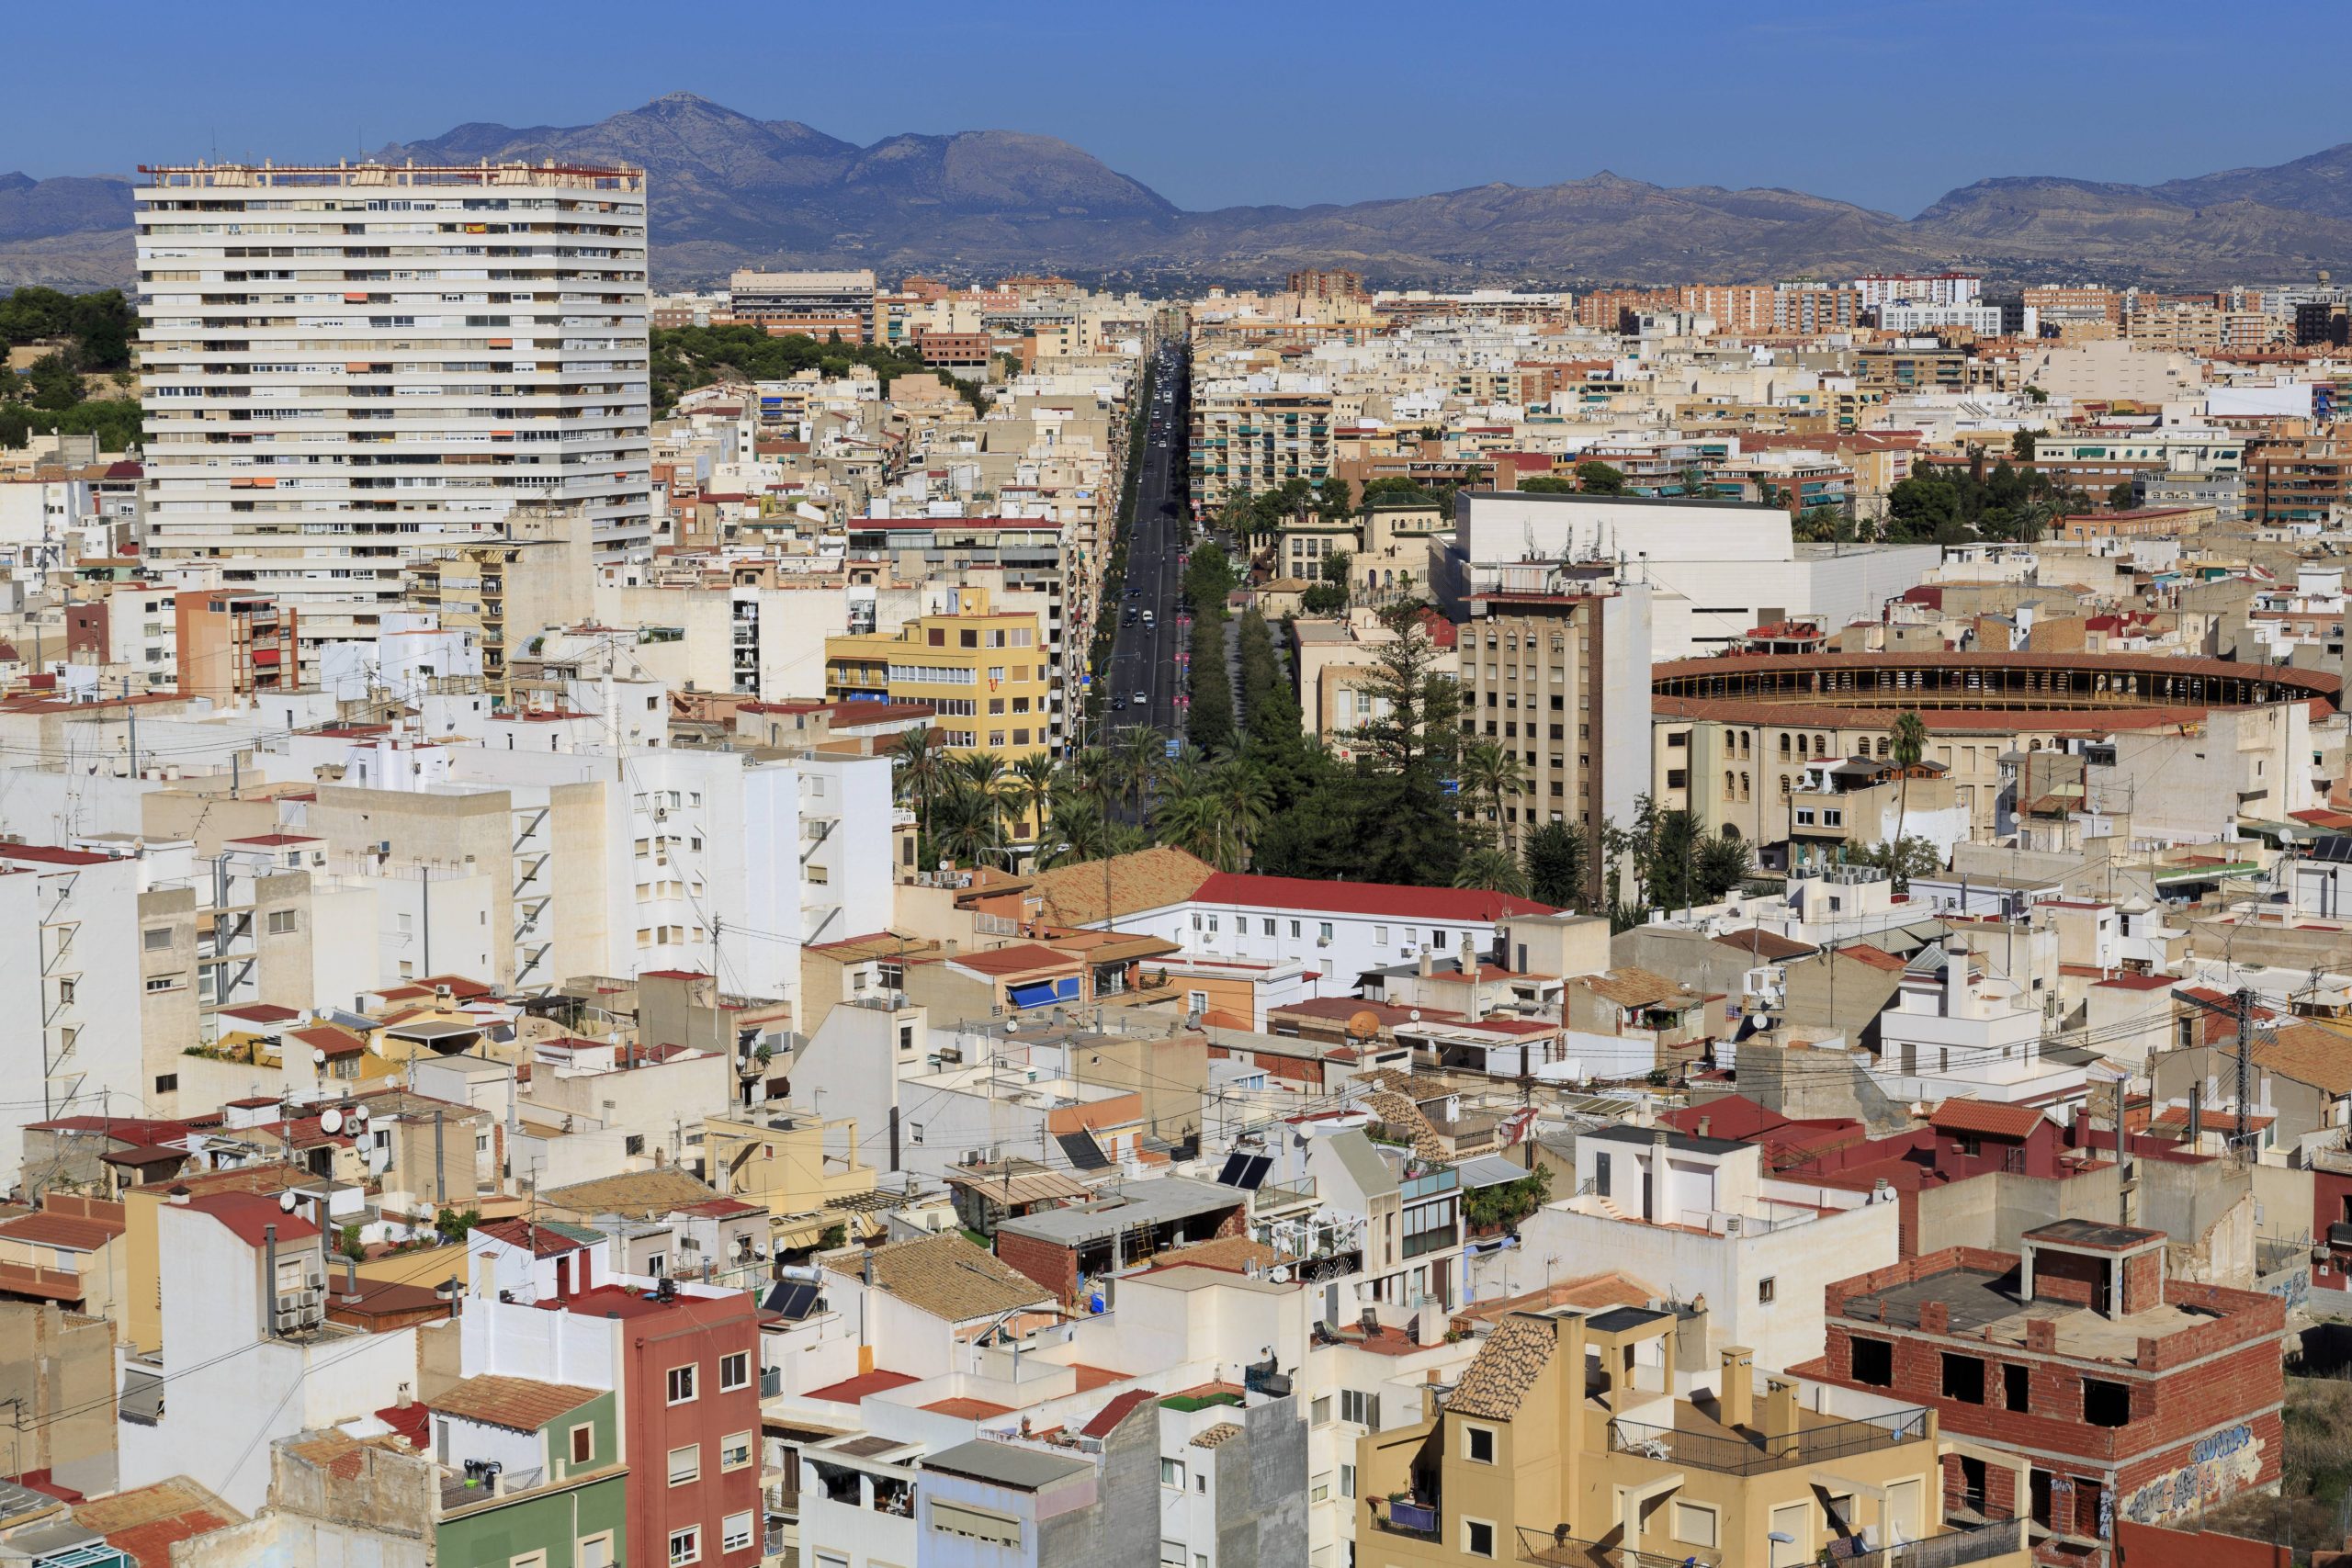 Alicante hotels almost 75% full for Easter holidays on Spain's Costa Blanca